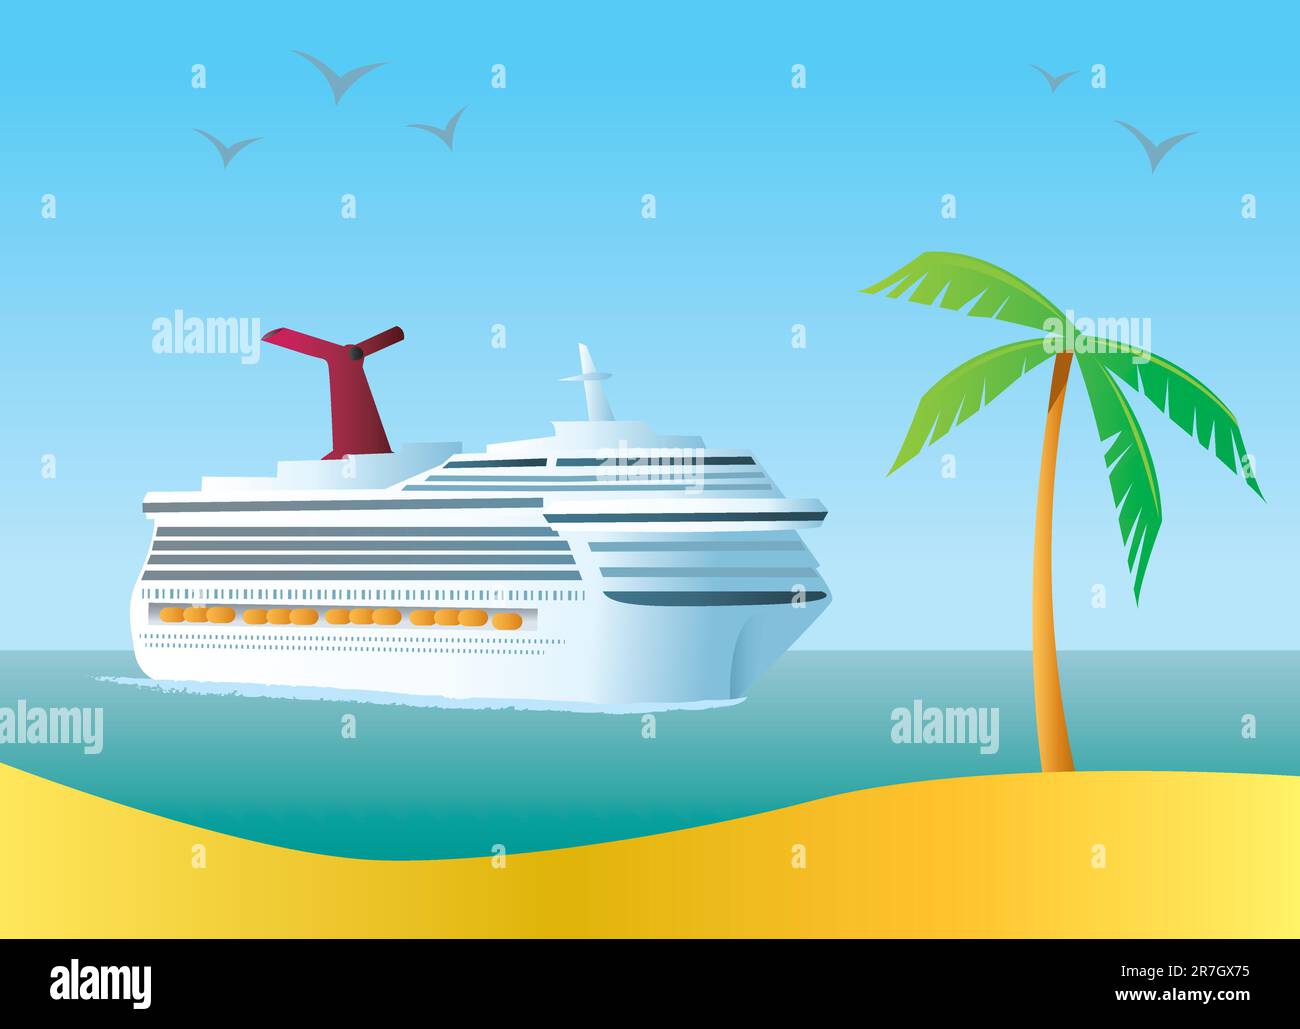 Illustration of a Cruise Ship coming in to a tropical destination. Stock Vector